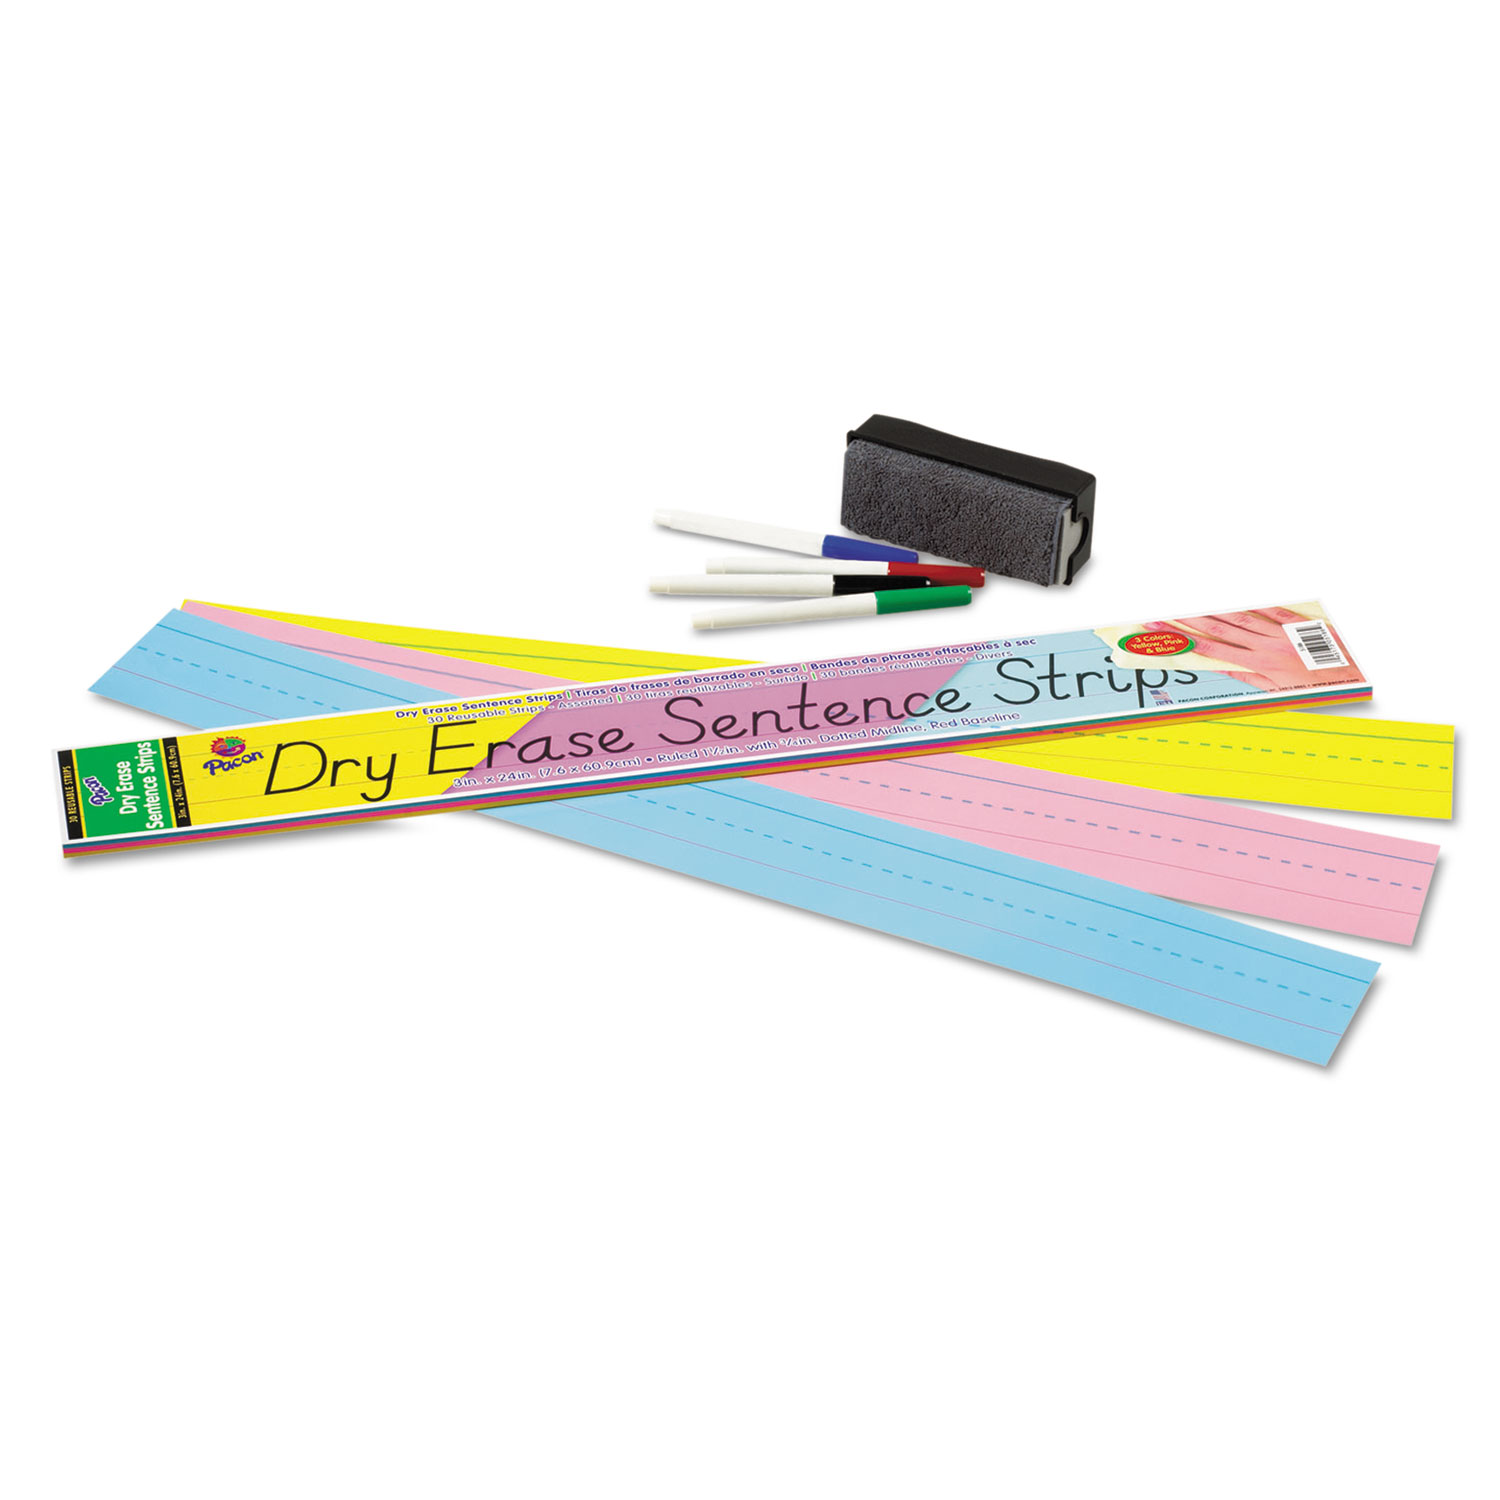 Pacon Dry Erase Sentence Strips, 3 x 12 Inches, Assorted Colors, Pack of 30 - image 2 of 2